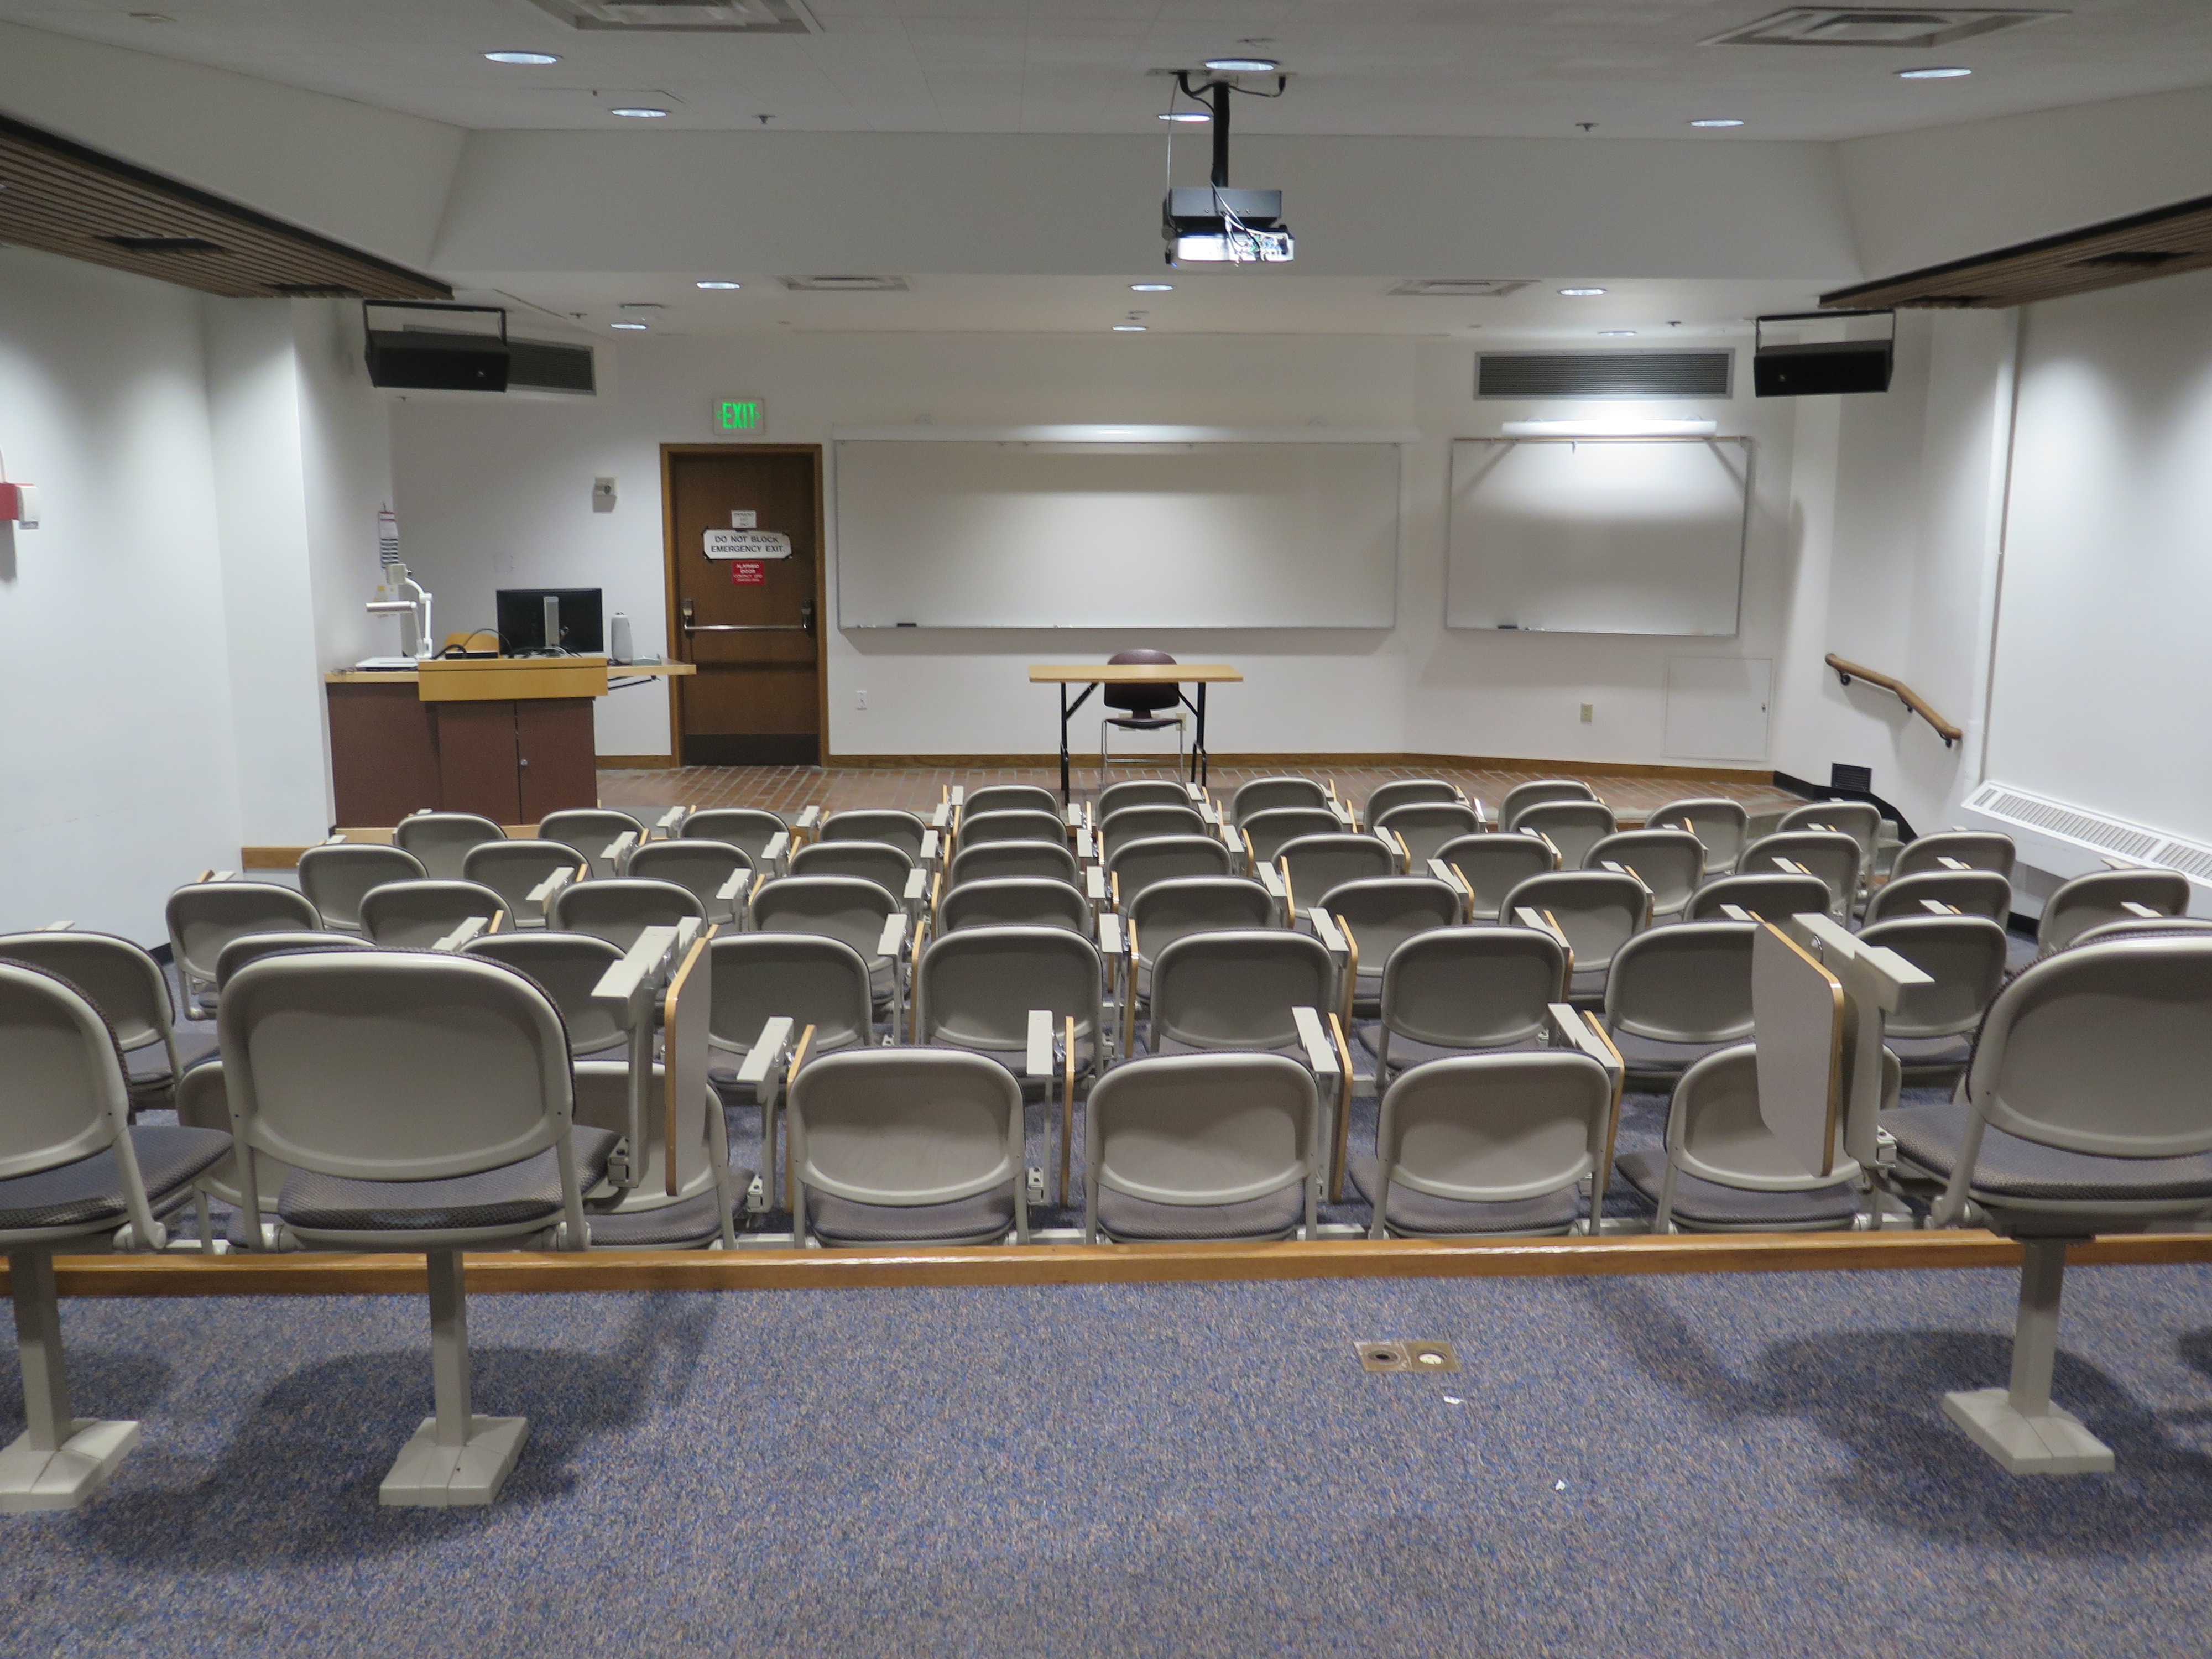 Room Consists of carpet floors, Stationary rows of tablet armchairs, a stage, white board and podium are located at the front of the room. 